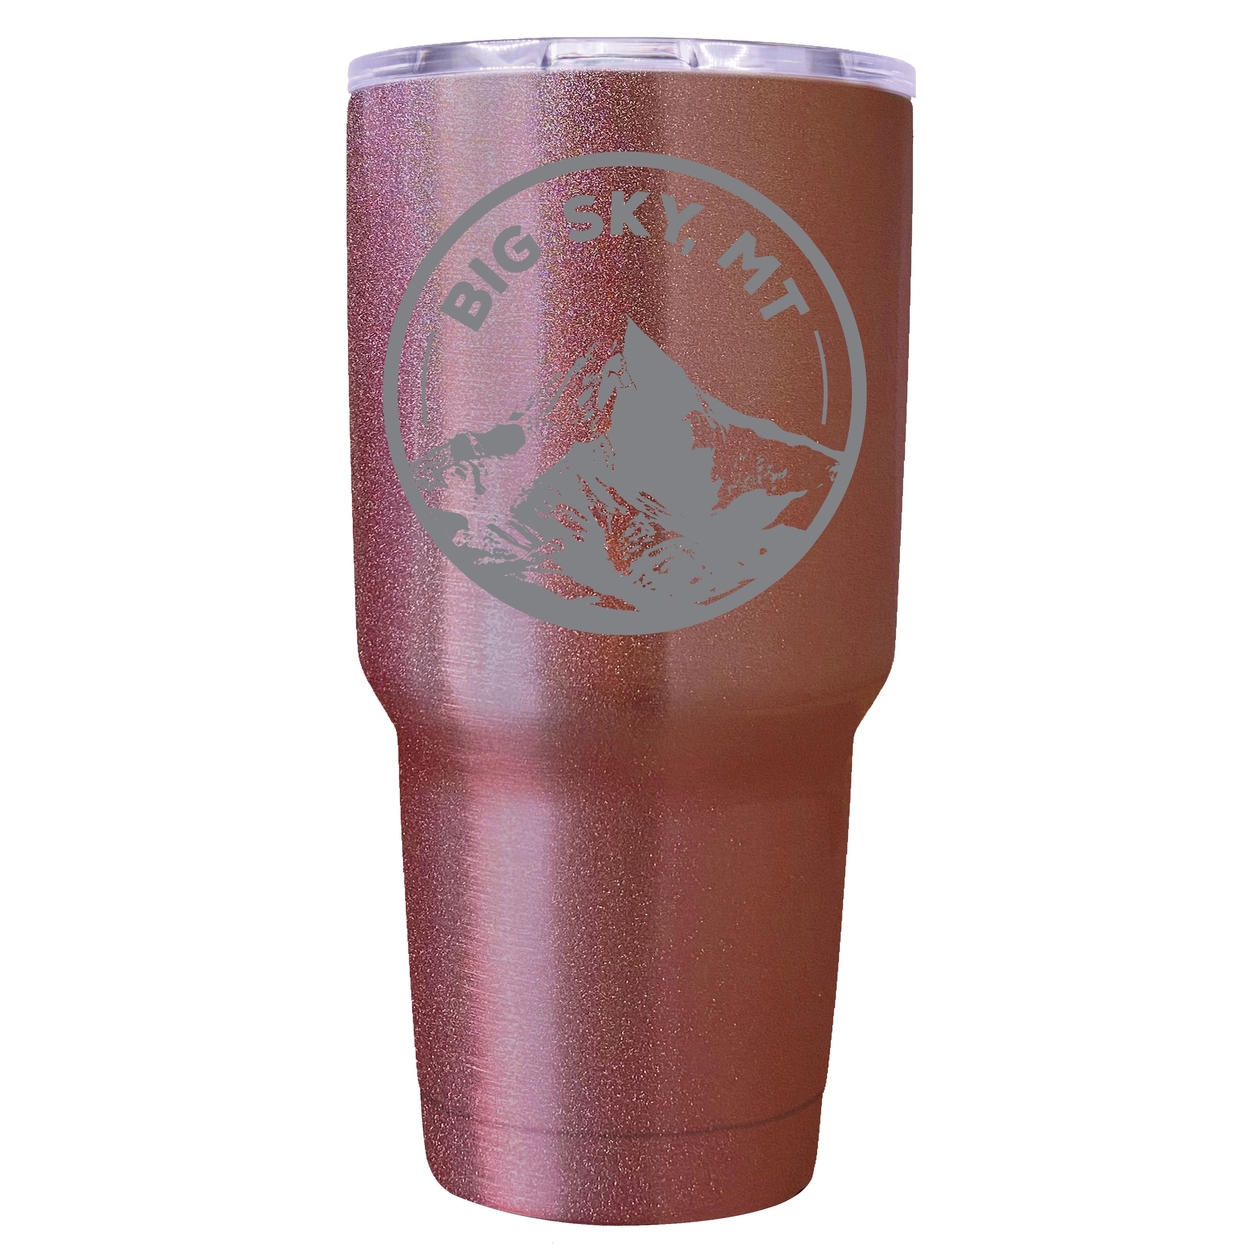 Big Sky Montana Souvenir 24 Oz Engraved Insulated Stainless Steel Tumbler - Rose Gold,,4-Pack